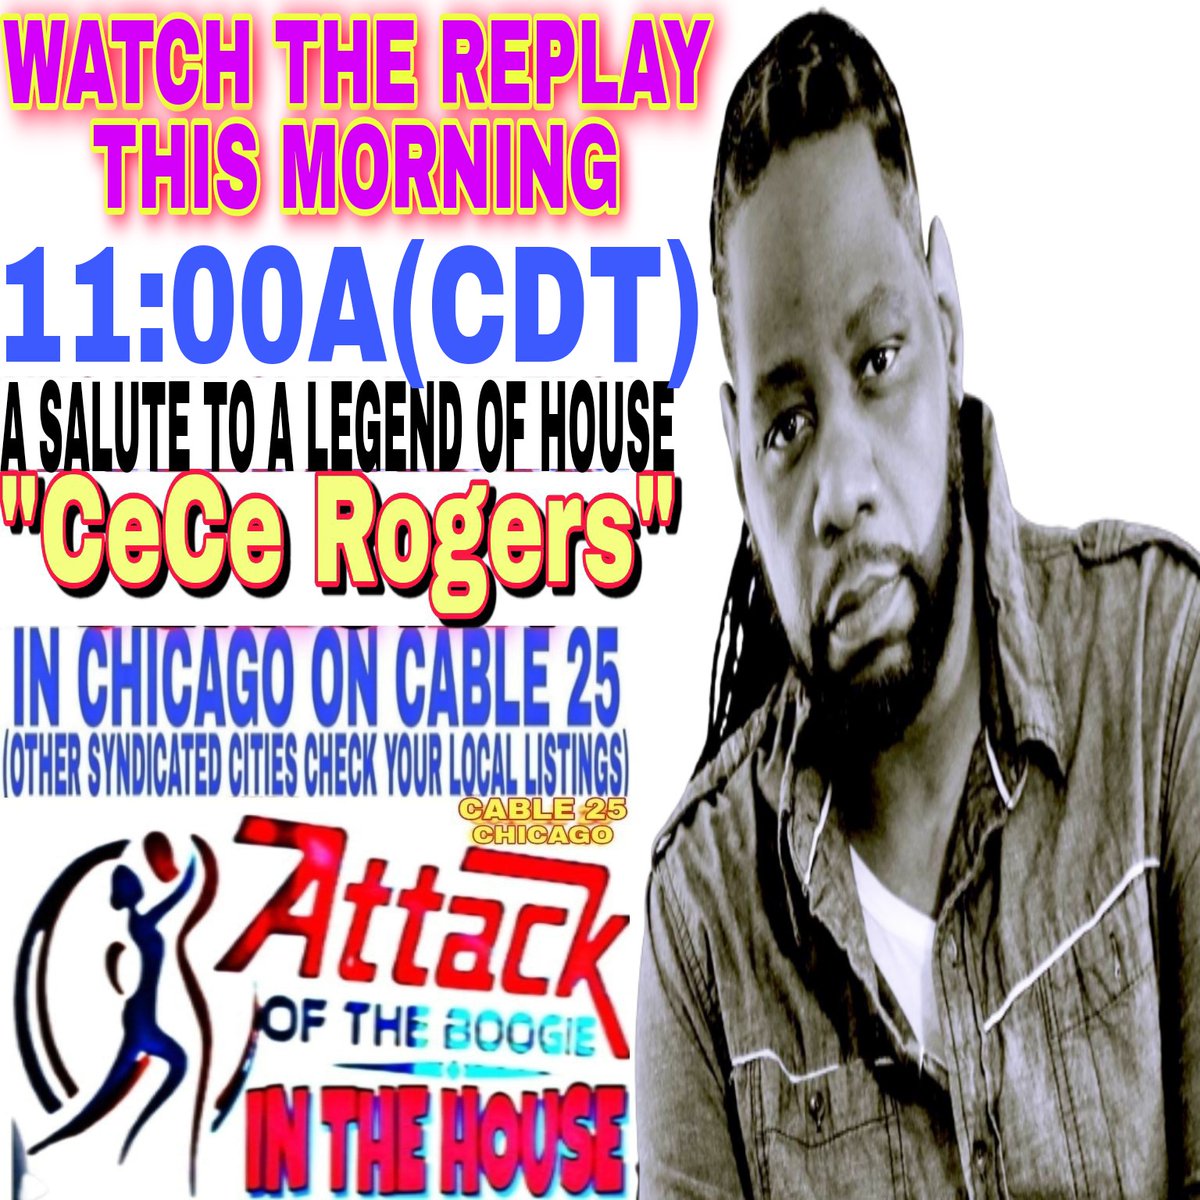 WATCH THE REPLAY THIS MORNING!
11:00A(CDT)
'ATTACK OF THE BOOGIE IN THE HOUSE'
PRESENTS A SALUTE TO A LEGEND OF HOUSE
'CeCe Rogers'
IN CHICAGO ON CABLE 25
(OTHER SYNDICATED CITIES CHECK YOUR LOCAL LISTINGS)

@cecerogers #cecerogers #marcusmixx #HouseMusic #radio #deephouse #dj